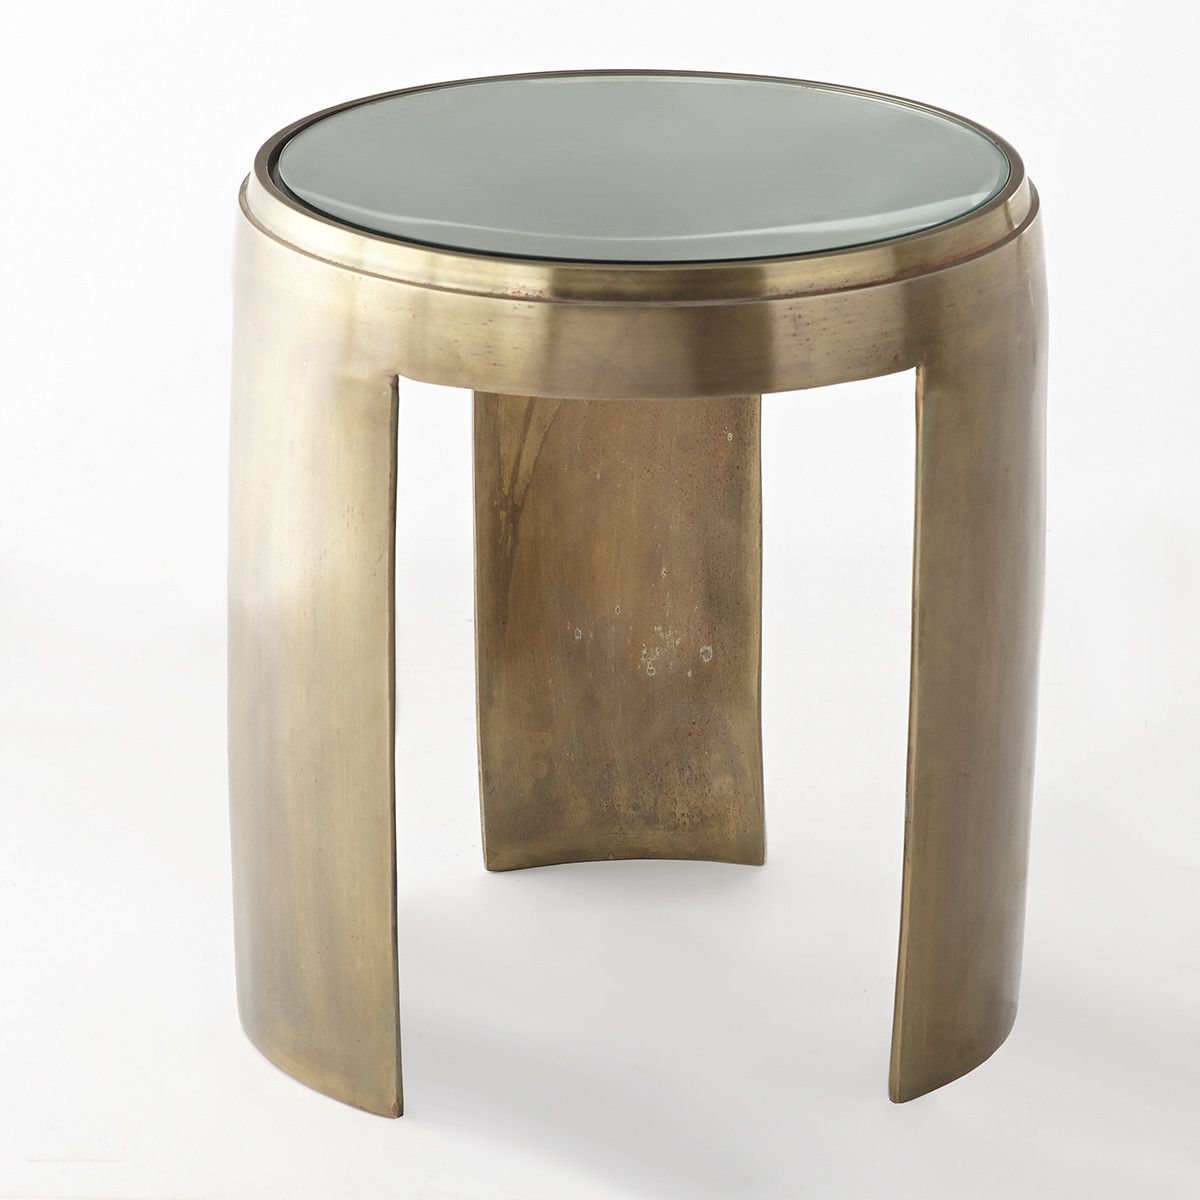 Concave Side Table – Antiqued Glass Tripod Curved Leg Regarding Most Current Coffee Tables With Tripod Legs (View 14 of 20)